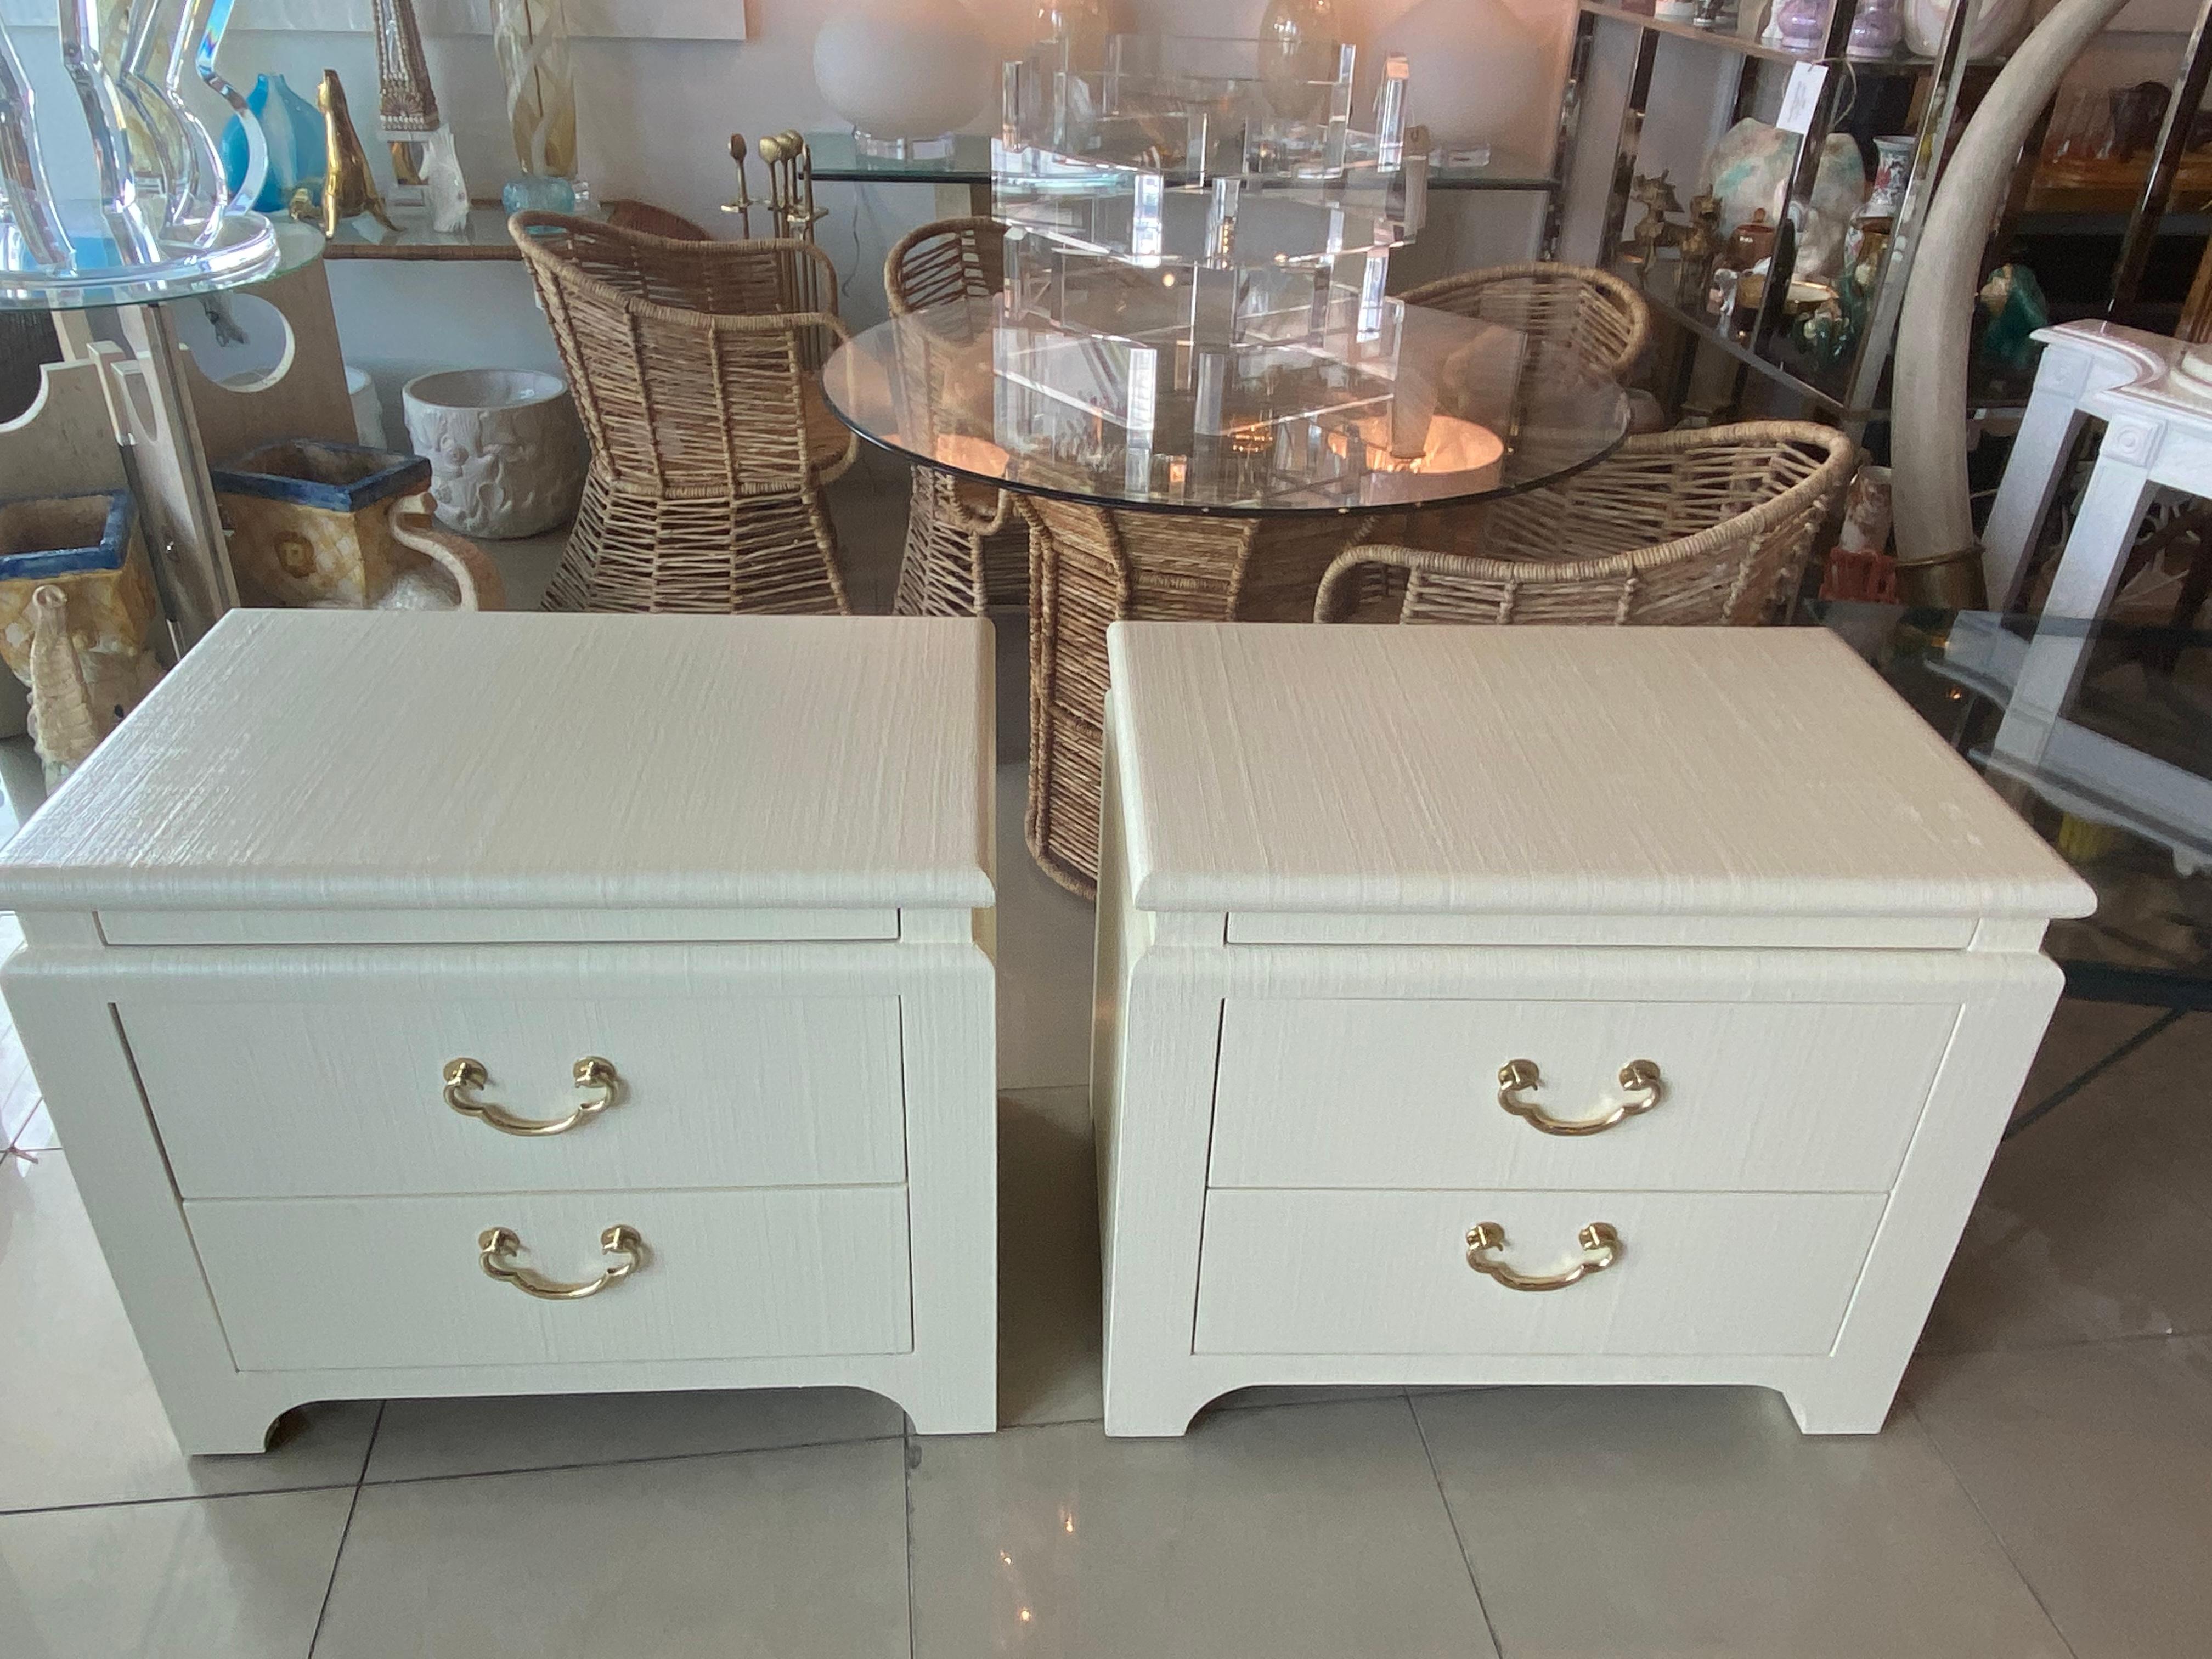 Lovely pair of vintage raffia Harrison Van Horn nightstands chests. These have been newly lacquered in a creamy linen color. Brass hardware has been professionally polished. These are finished on all sides including backs so they can float in a room